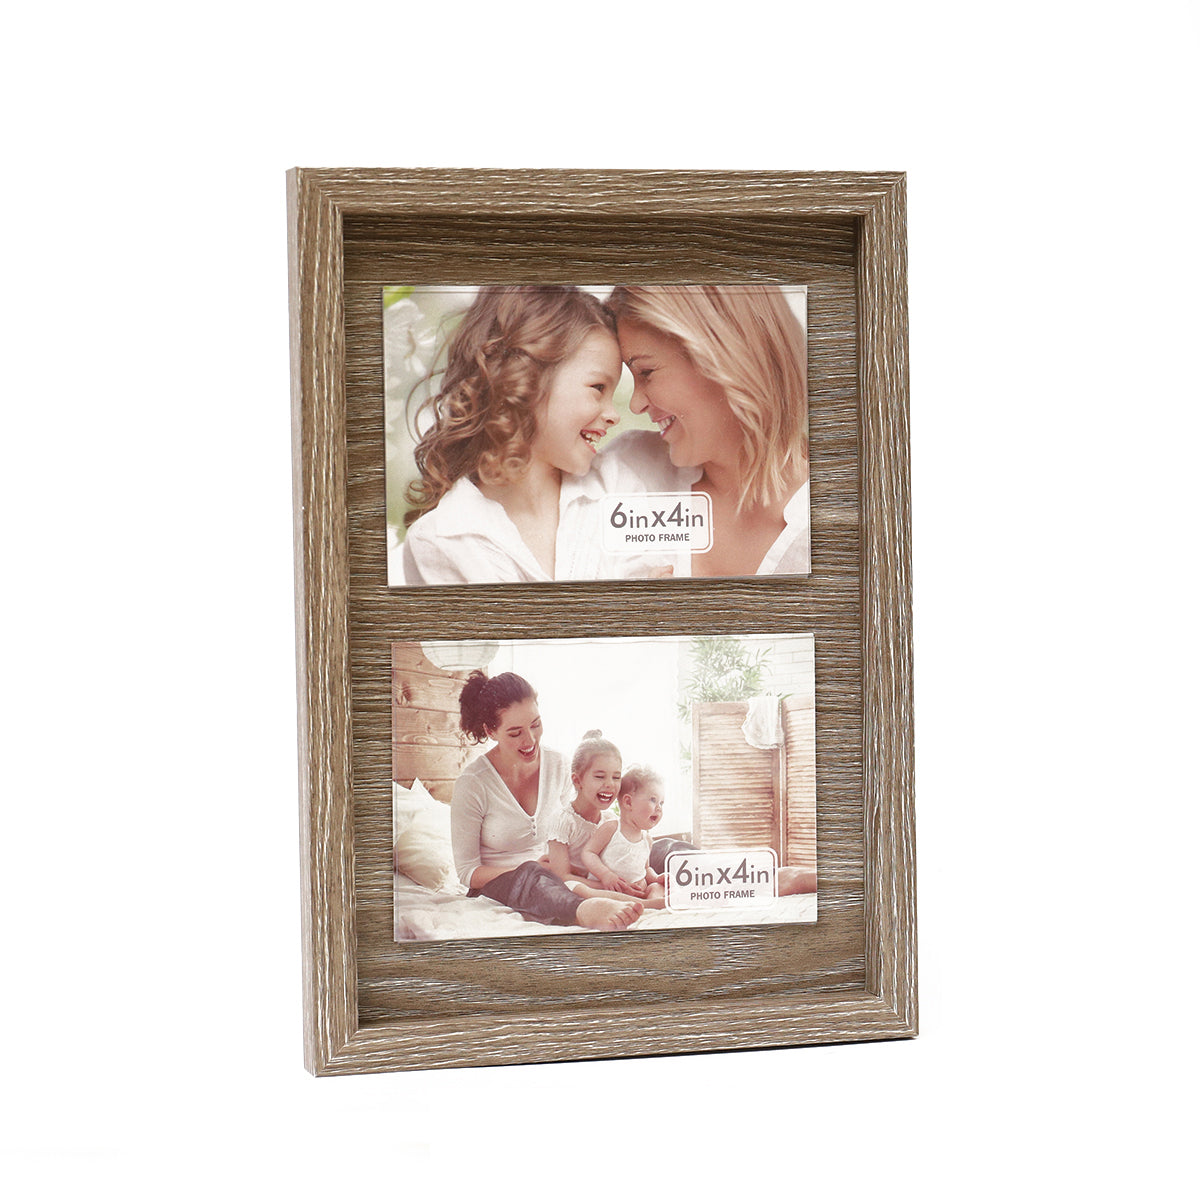 2-Display Rustic Wooden Picture Frame (7574625059040)